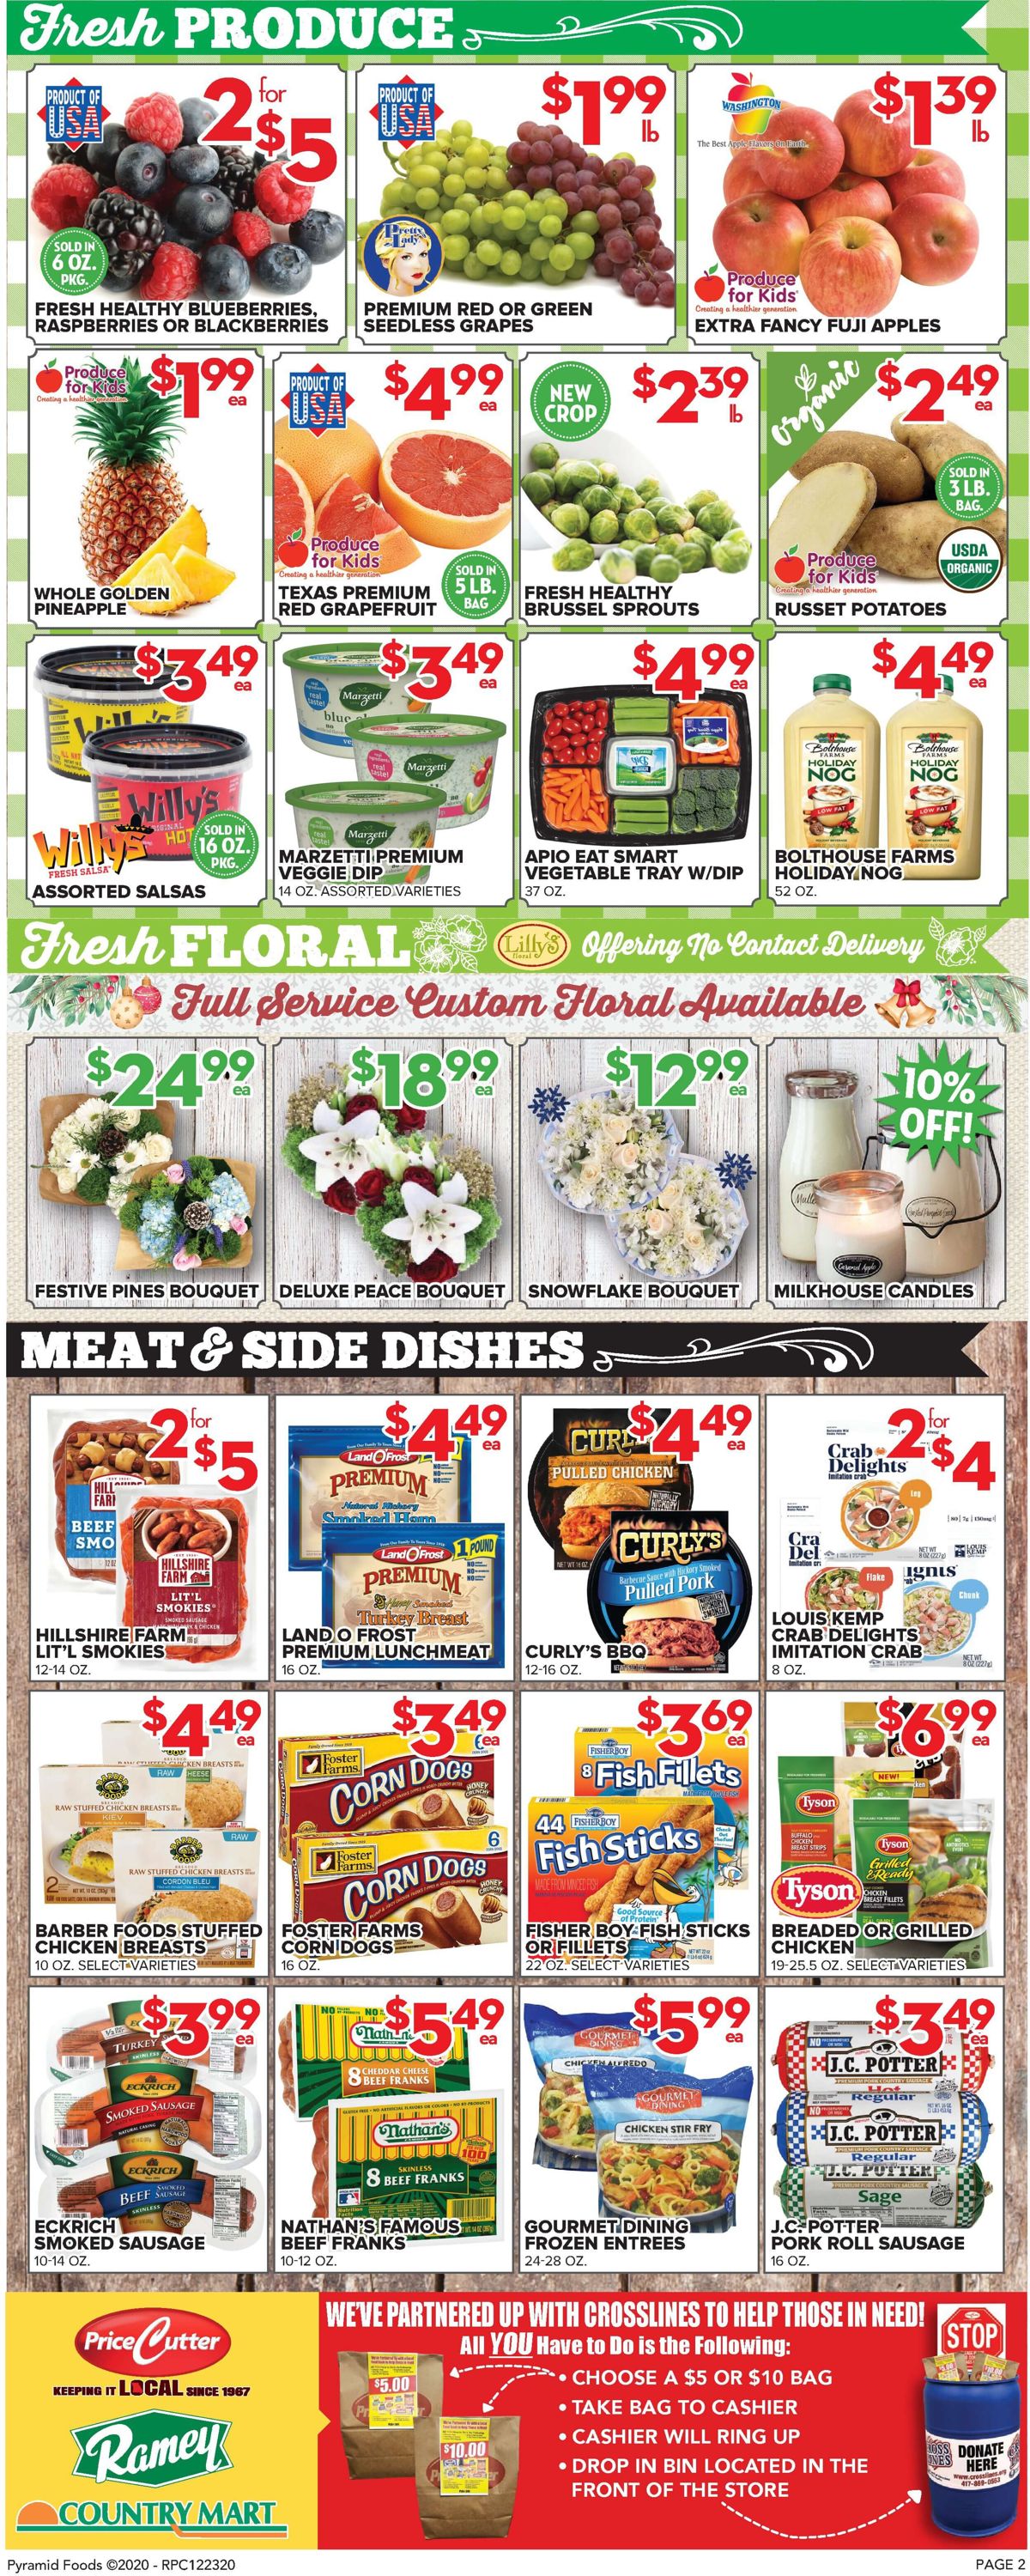 Price Cutter Weekly Ad Circular - valid 12/23-12/29/2020 (Page 2)